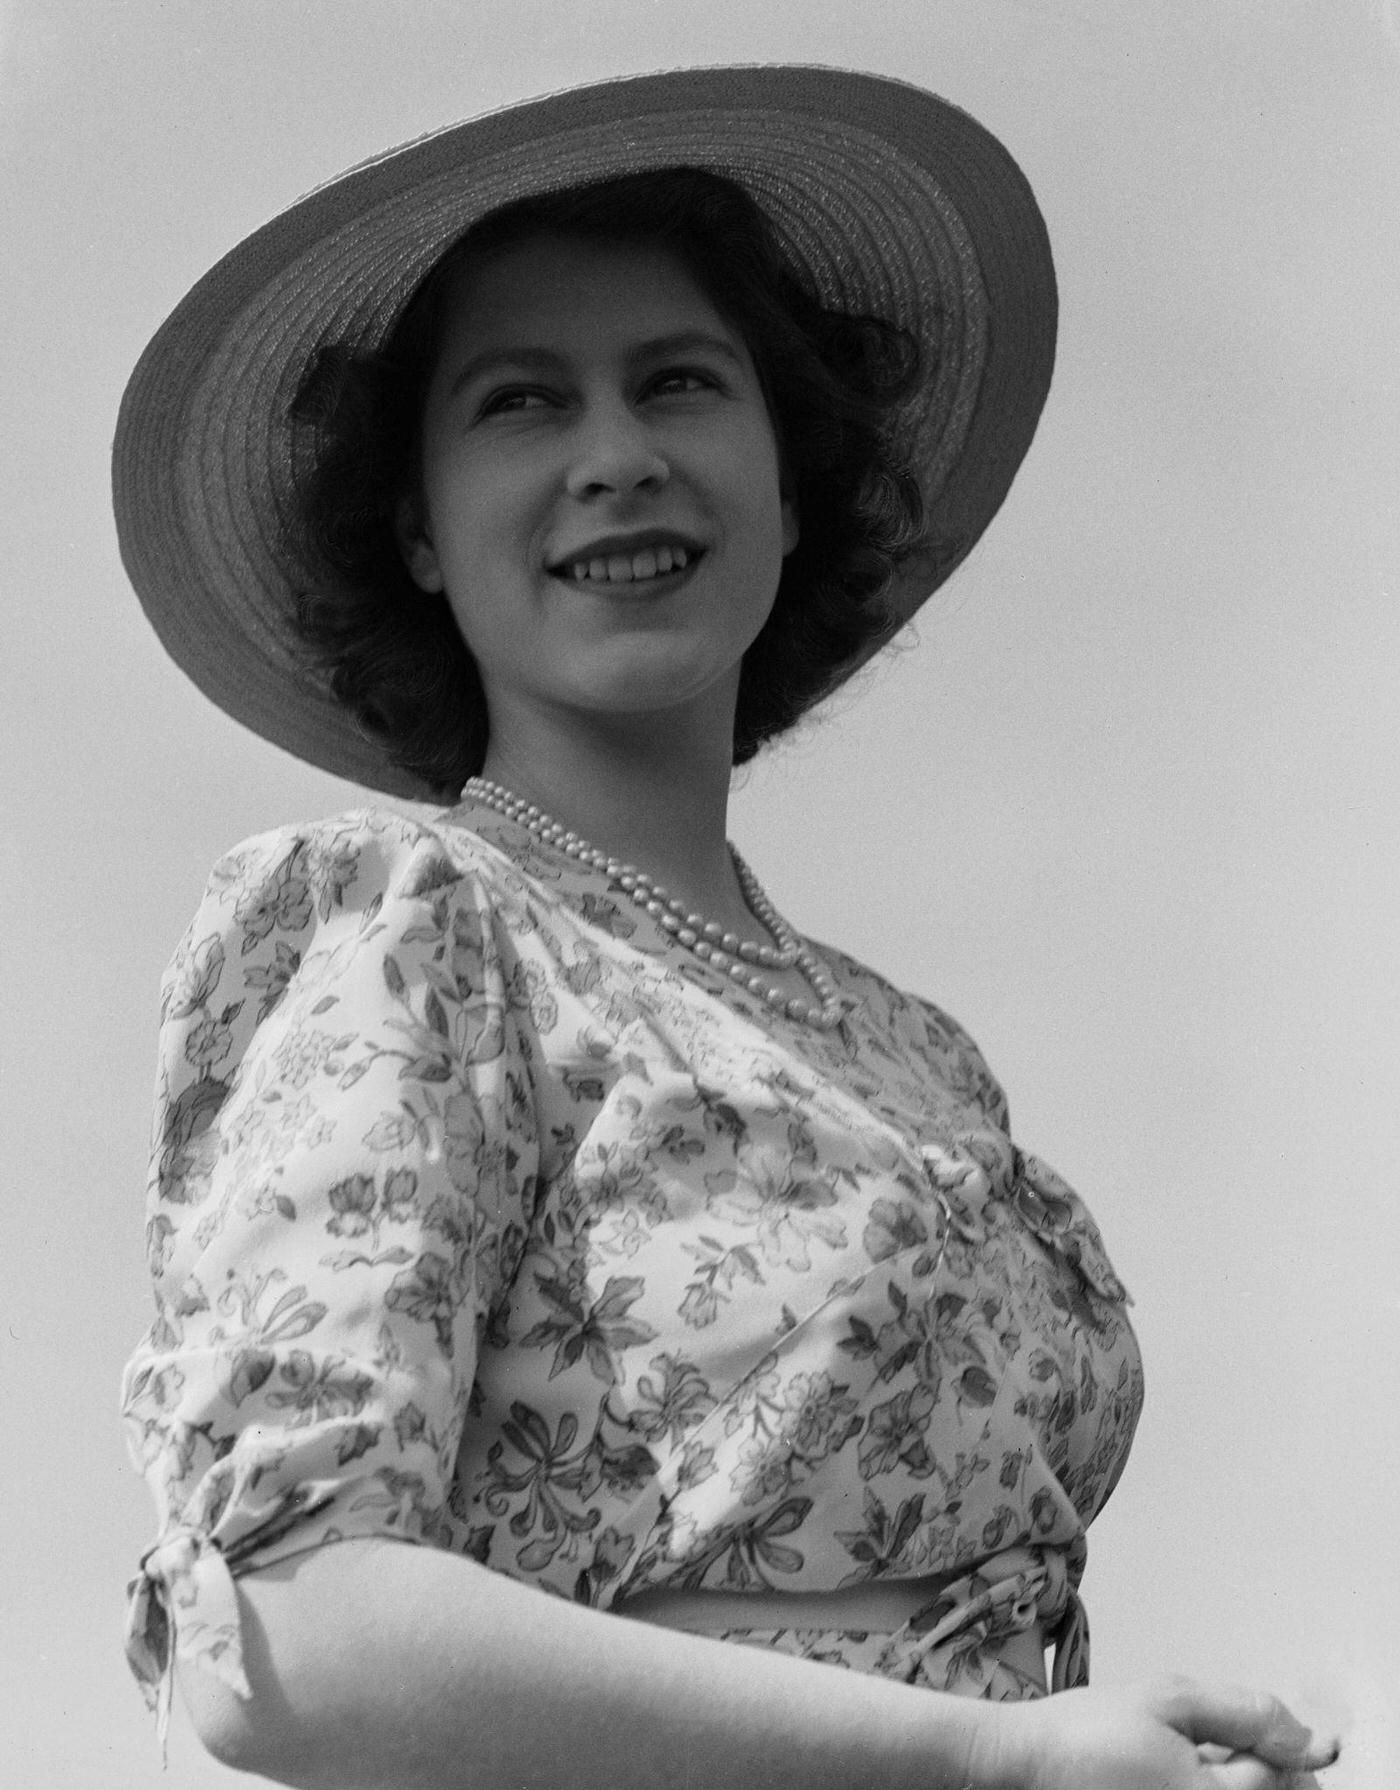 Princess Elizabeth wearing a summer dress and sunhat in the grounds of Windsor Castle, 1944